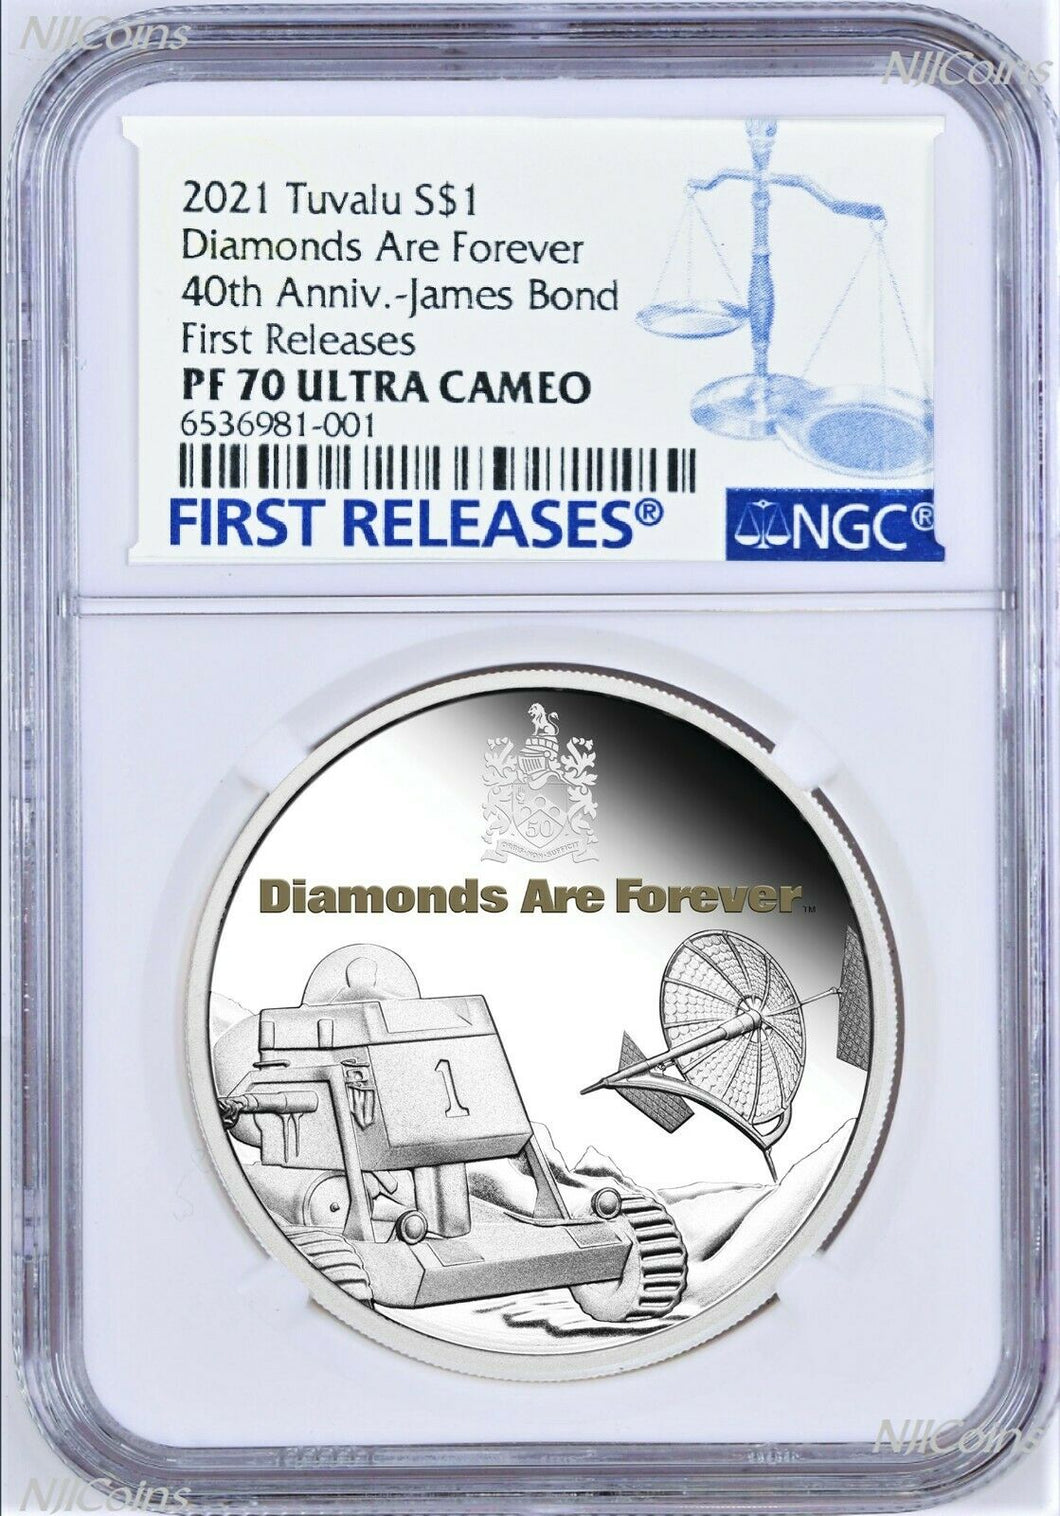 2021 James Bond Diamonds Are Forever SILVER PROOF $1 1oz COIN NGC PF70 FR